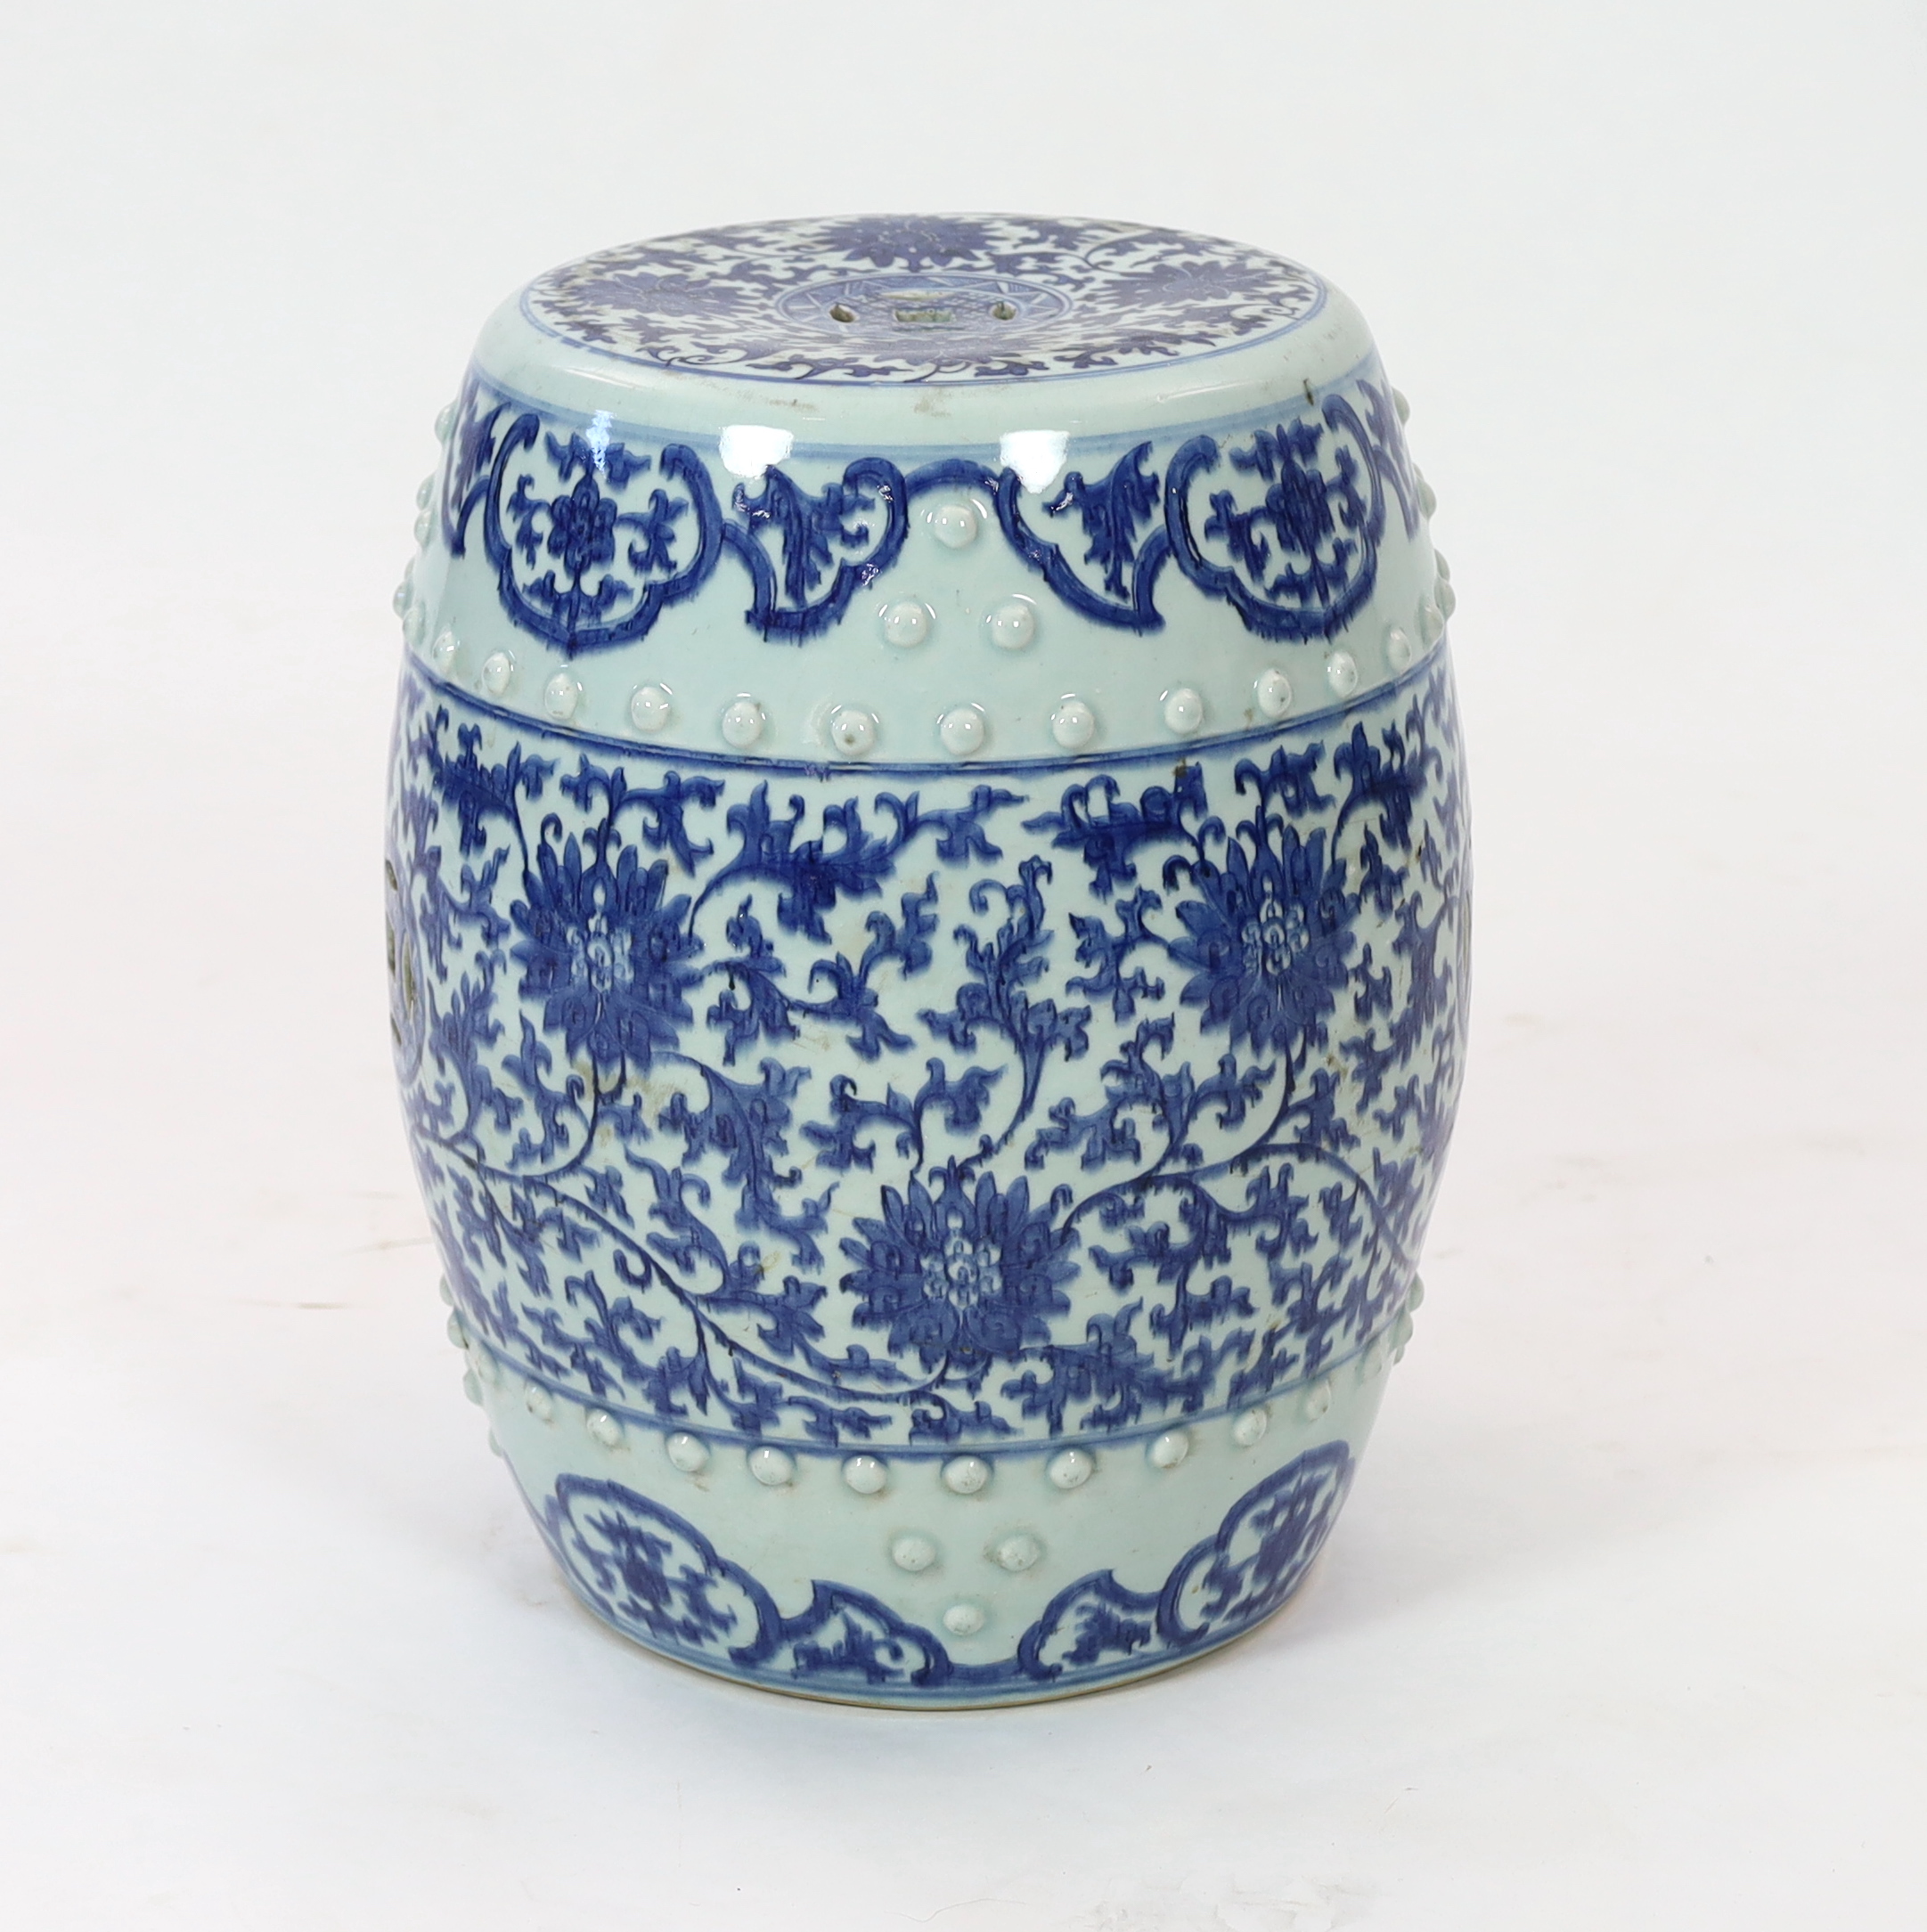 A Chinese blue and white porcelain stool, 19th century, painted with lotus flowers and scrolling - Image 2 of 5